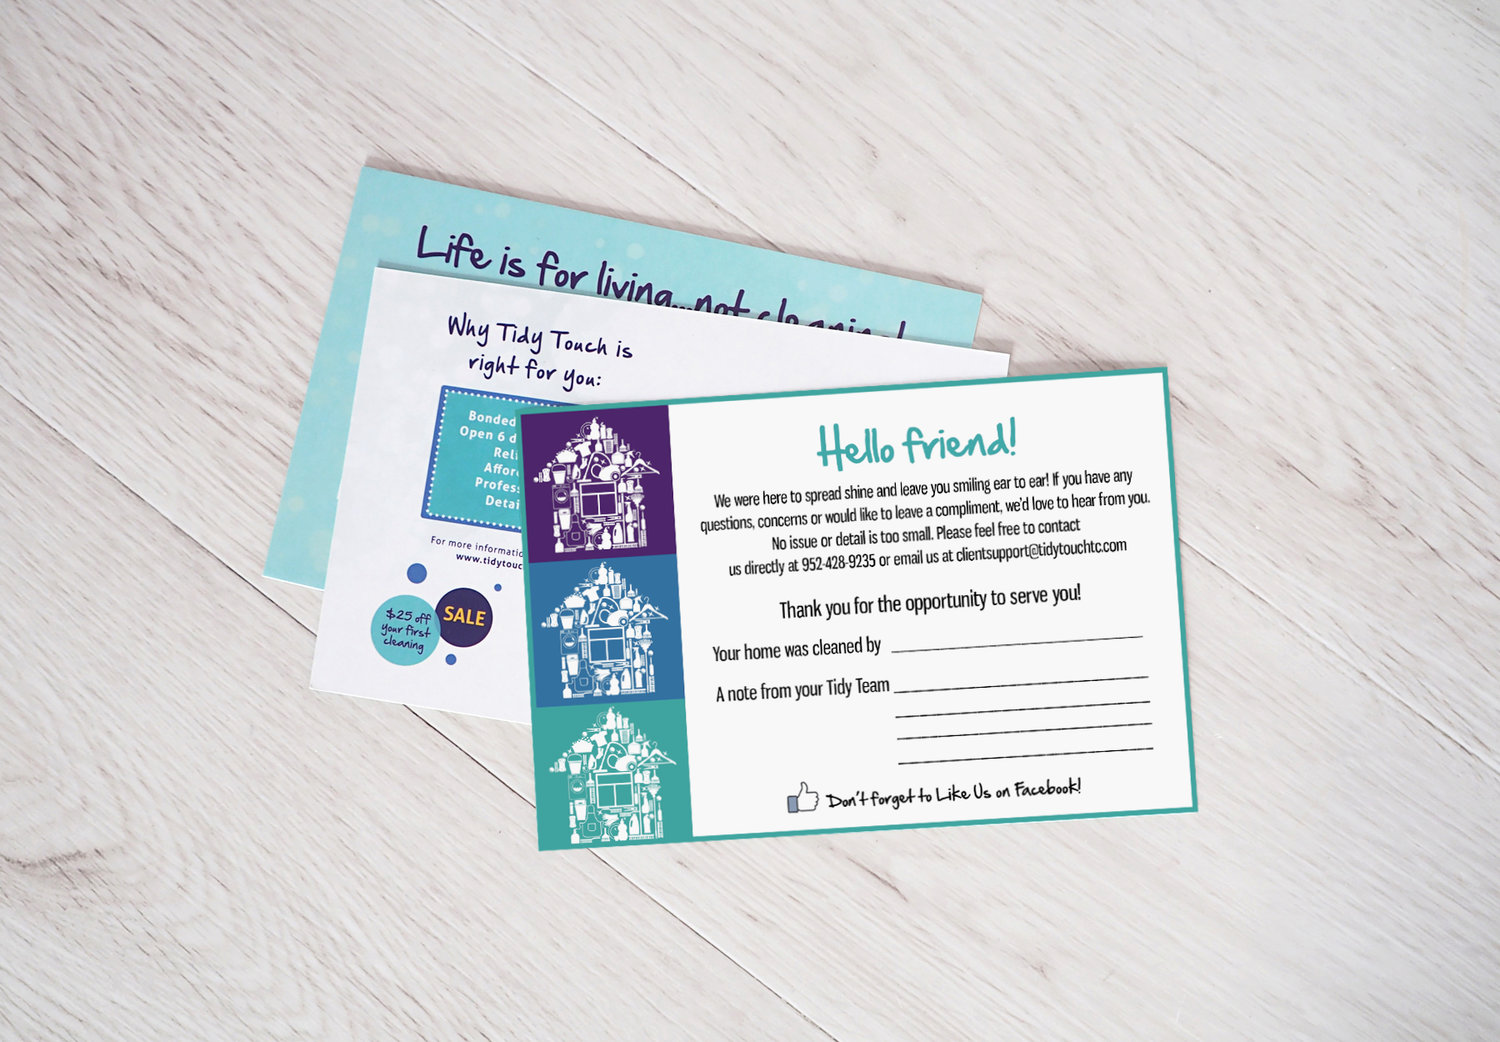  Postcards and Leave-Behinds - These pieces were created to help solve the problem of getting online reviews and ratings to help grow online booking.  